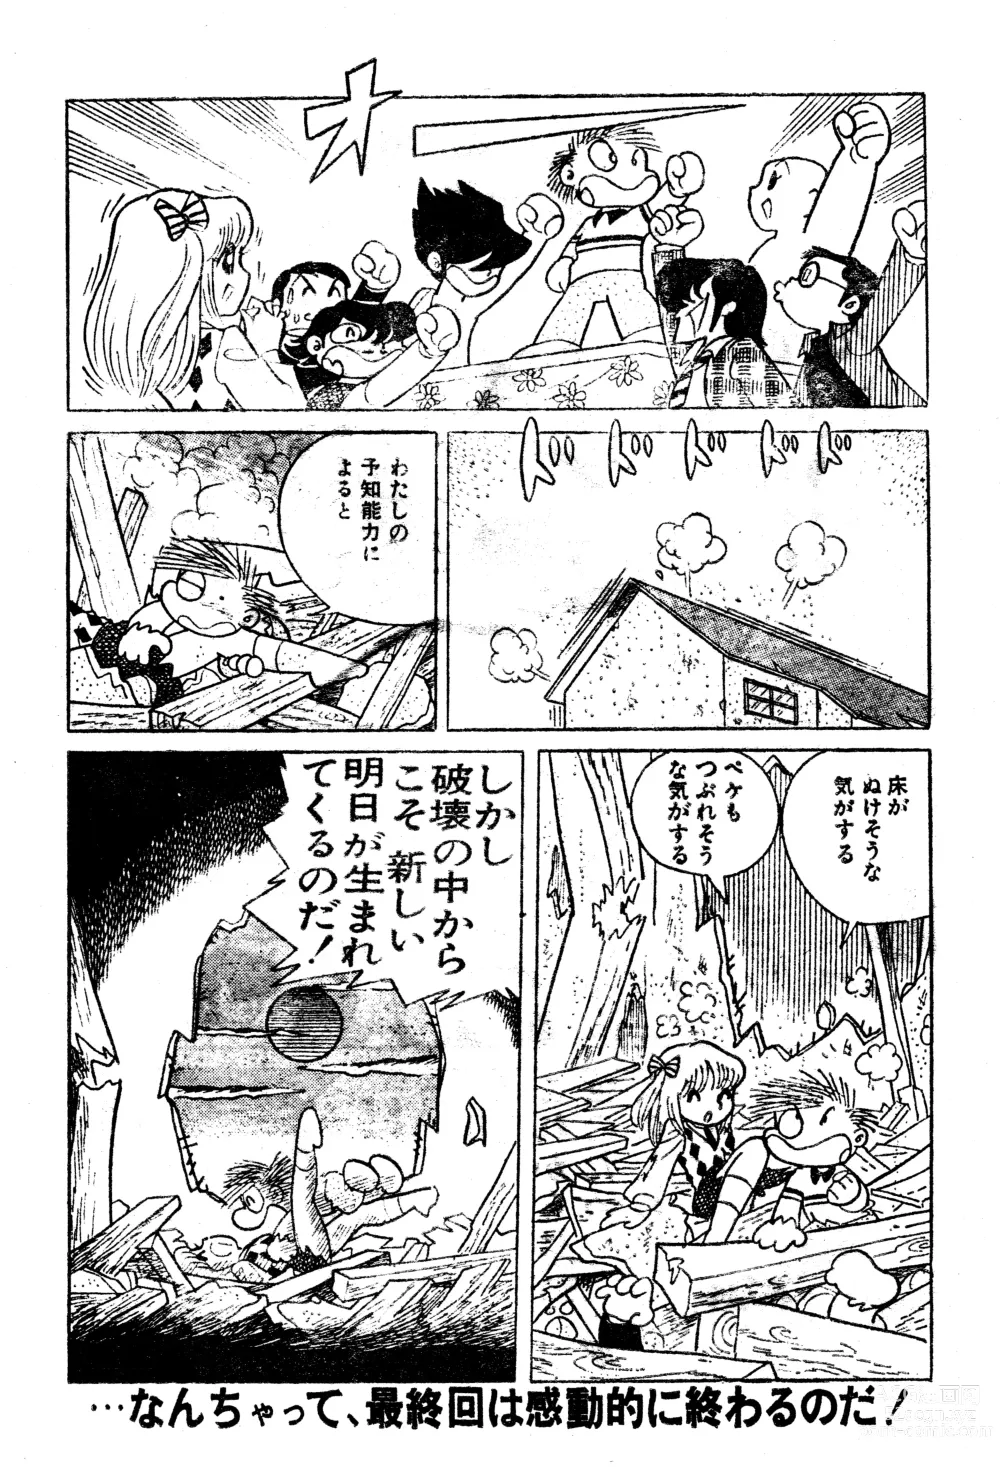 Page 45 of manga Dodemo inner space